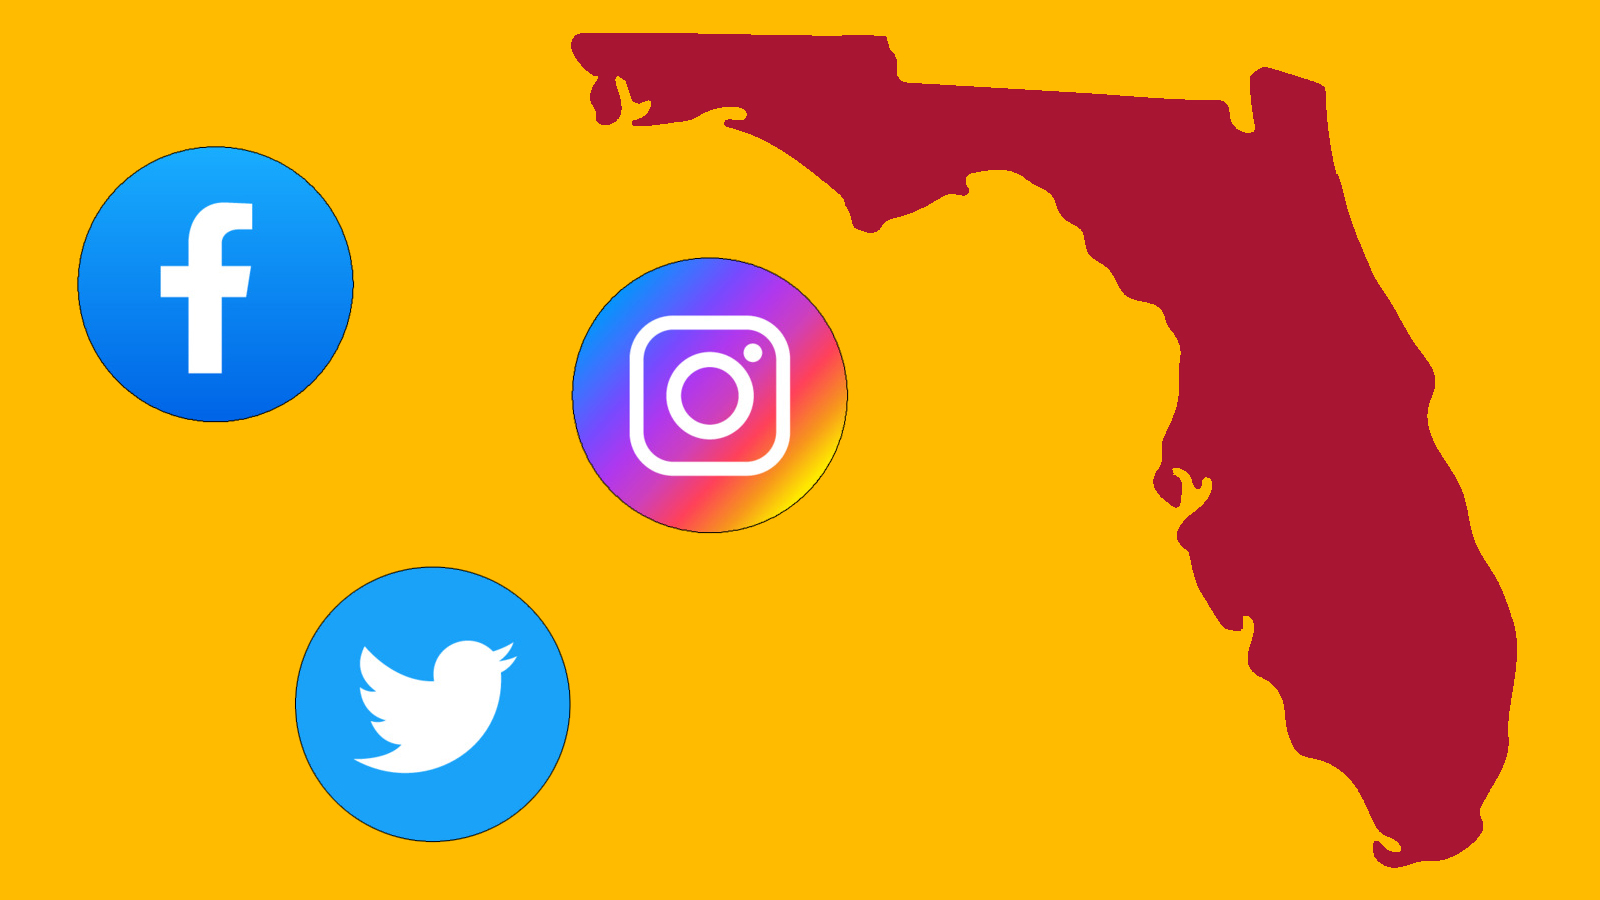 Graphic with the outline of the state of Florida and social media icons for Facebook, Instagram, and Twitter